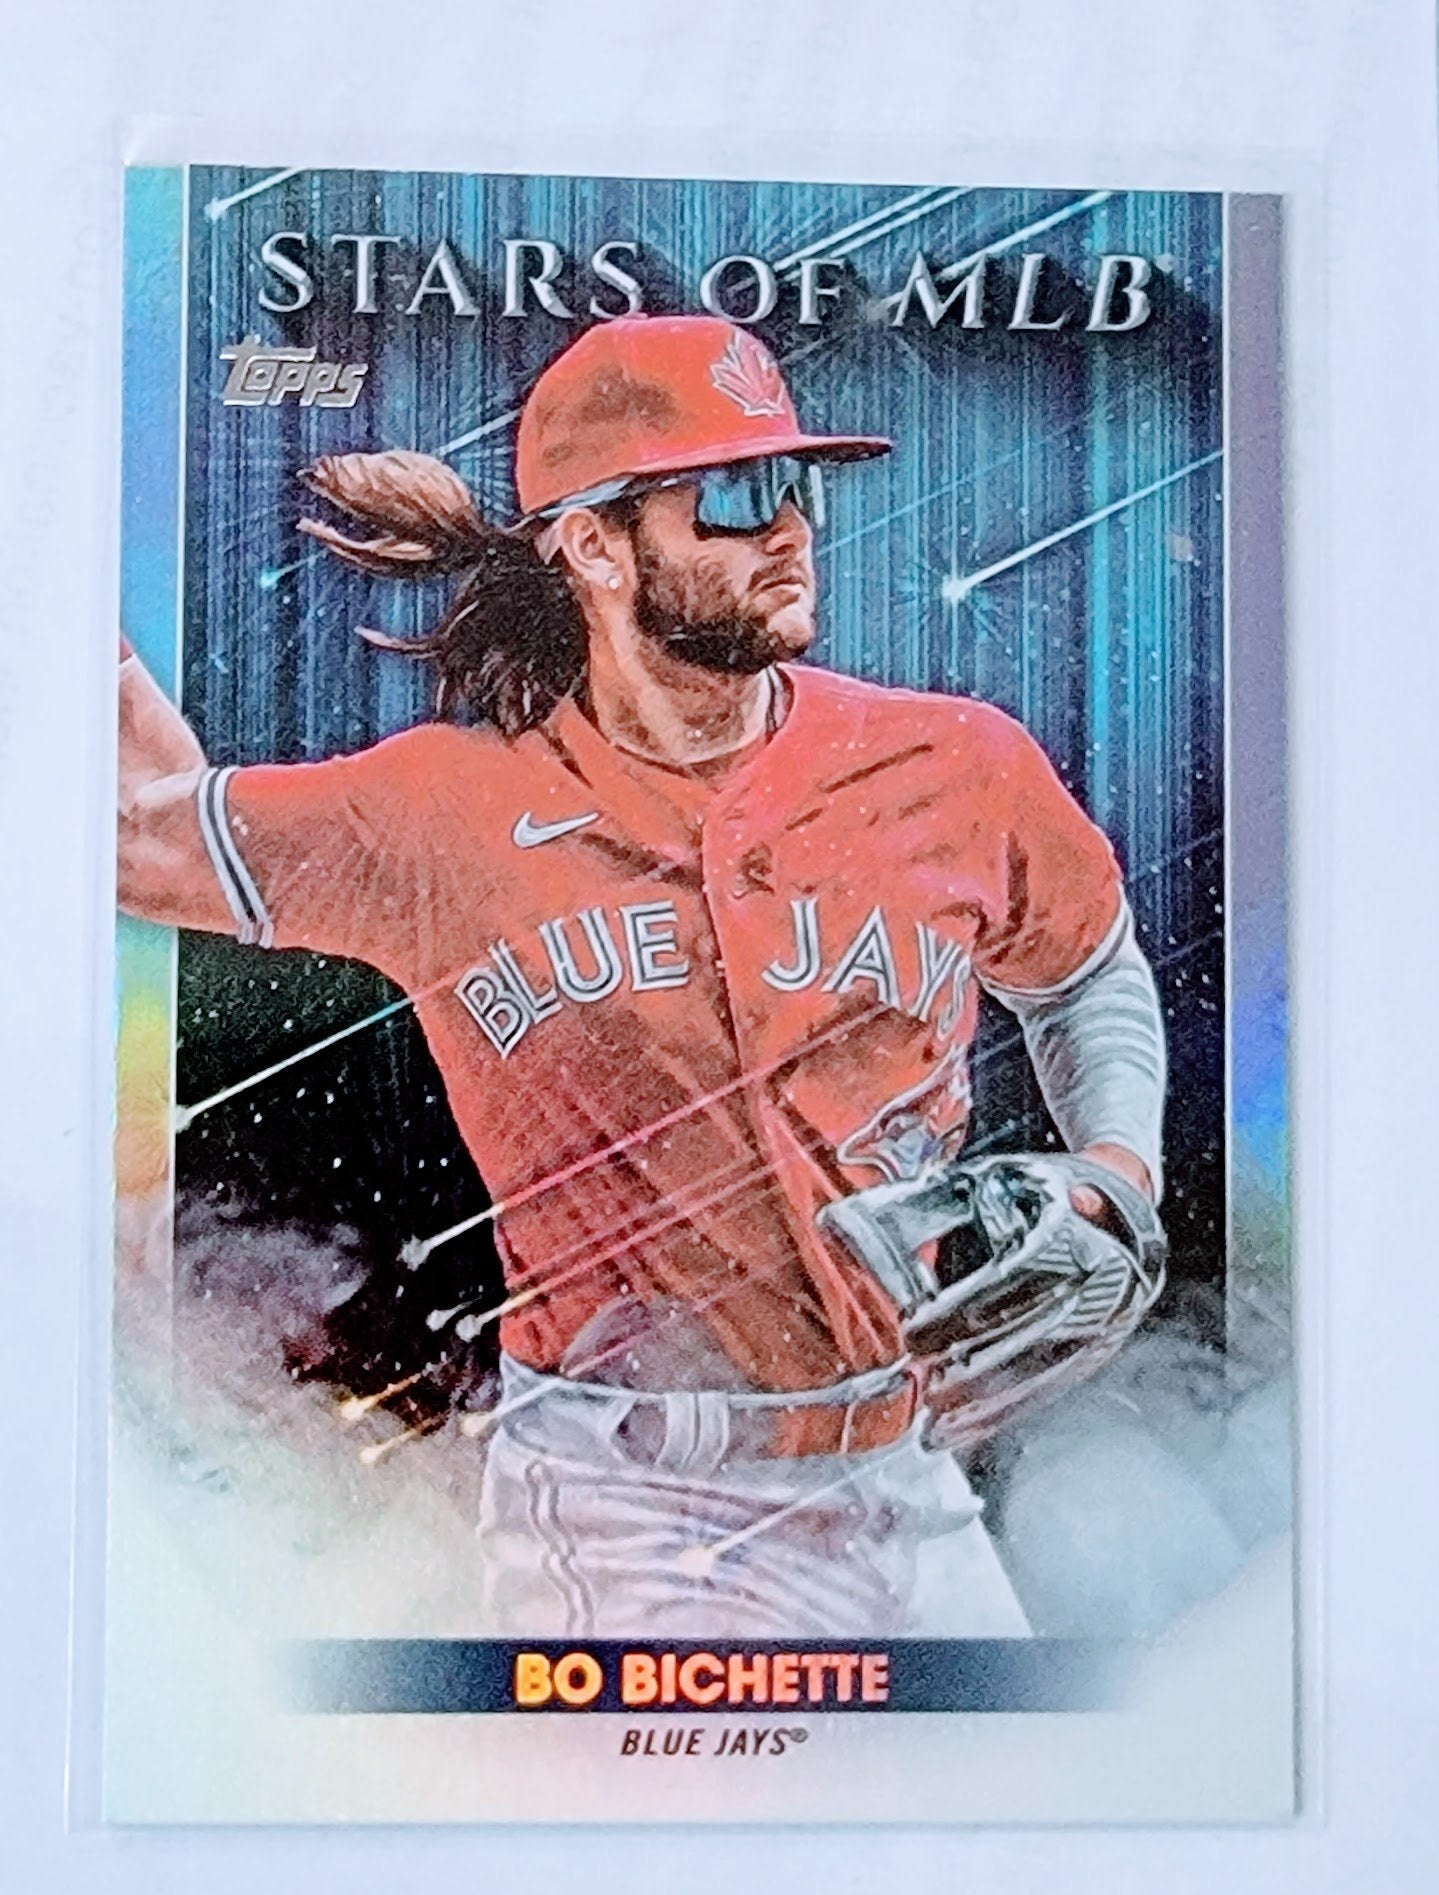 2022 Topps Bo Bichette Stars of the MLB Baseball Trading Card GRB1 simple Xclusive Collectibles   